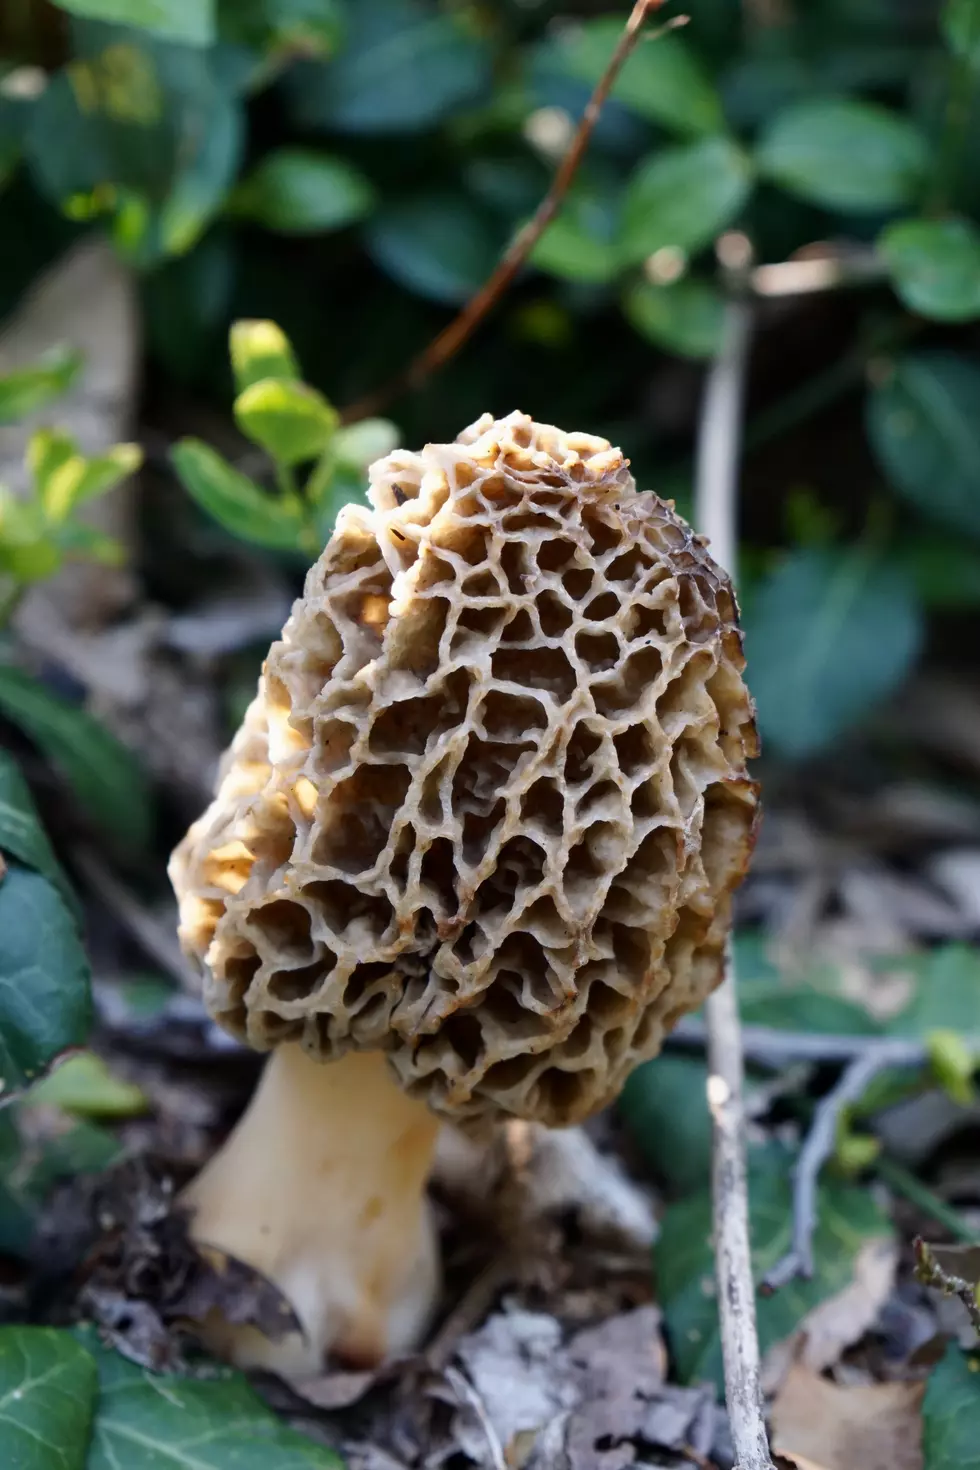 It’s Time to Find Morel Mushrooms in the Quad Cities